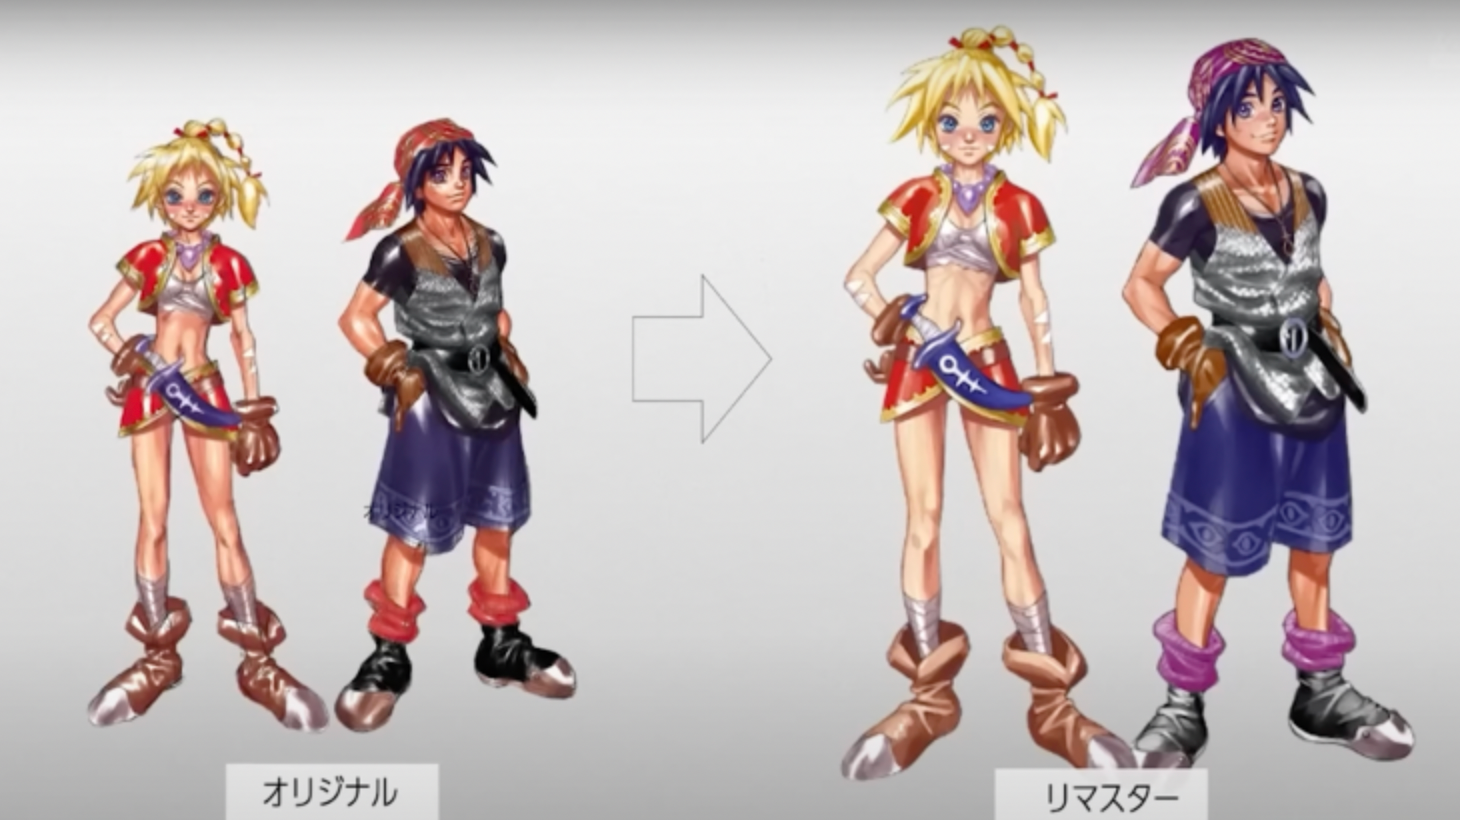 Some Original Chrono Cross Character Art was Unfinished Until the Remaster